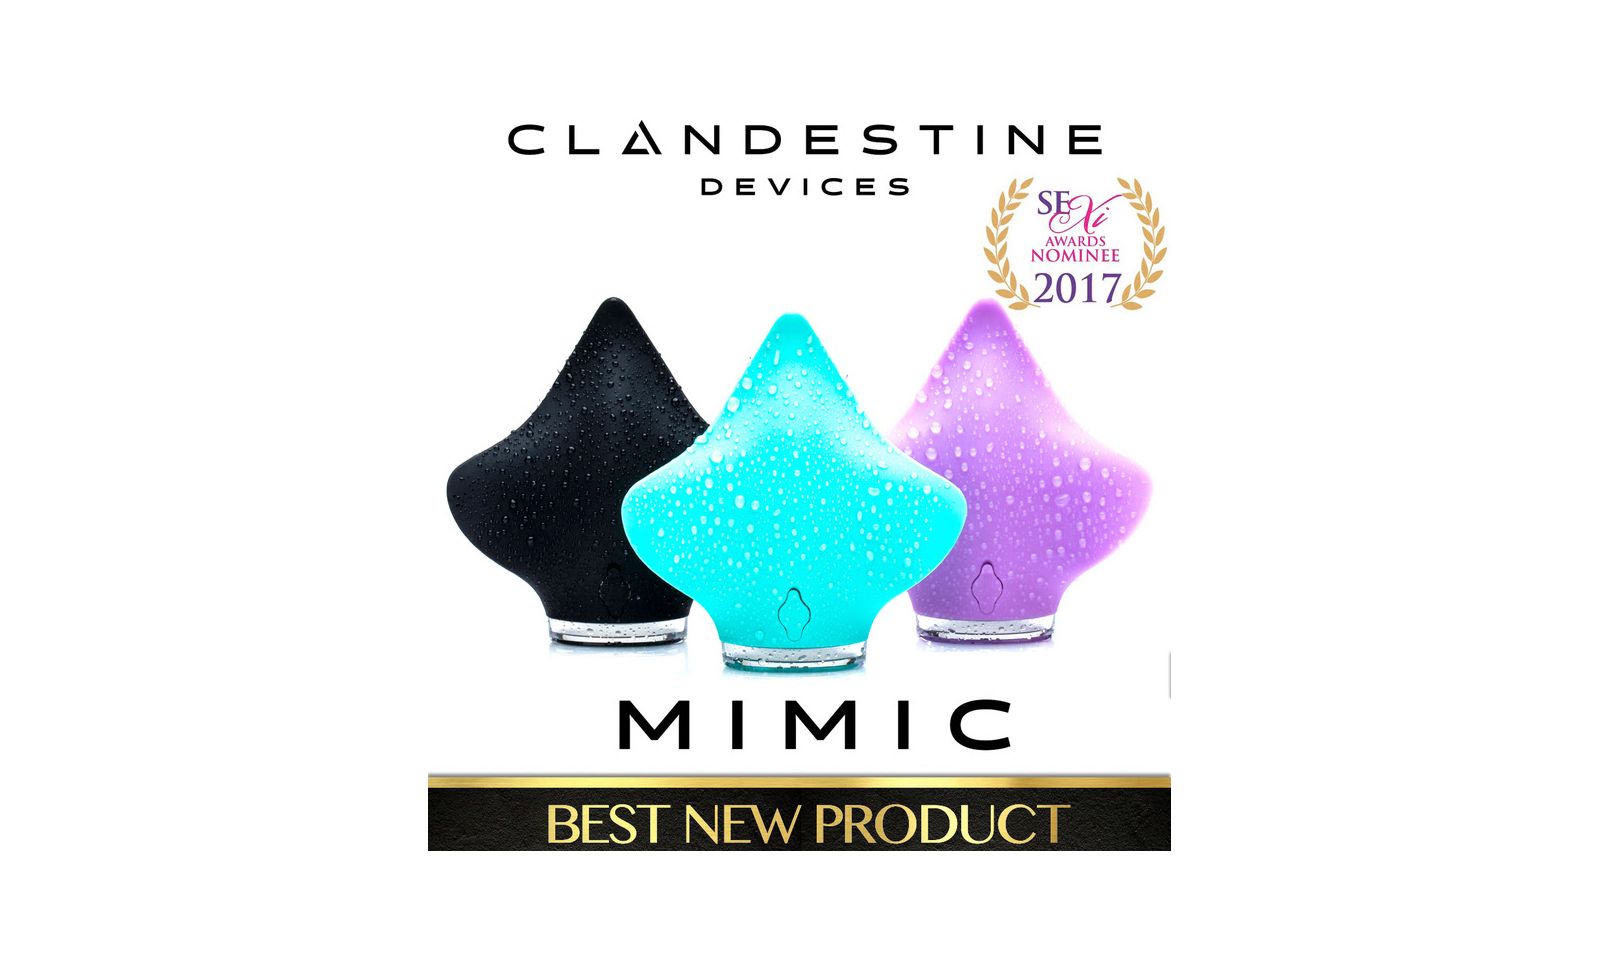 Clandestine Devices, Mimic Earn 2 StorErotica Awards Noms